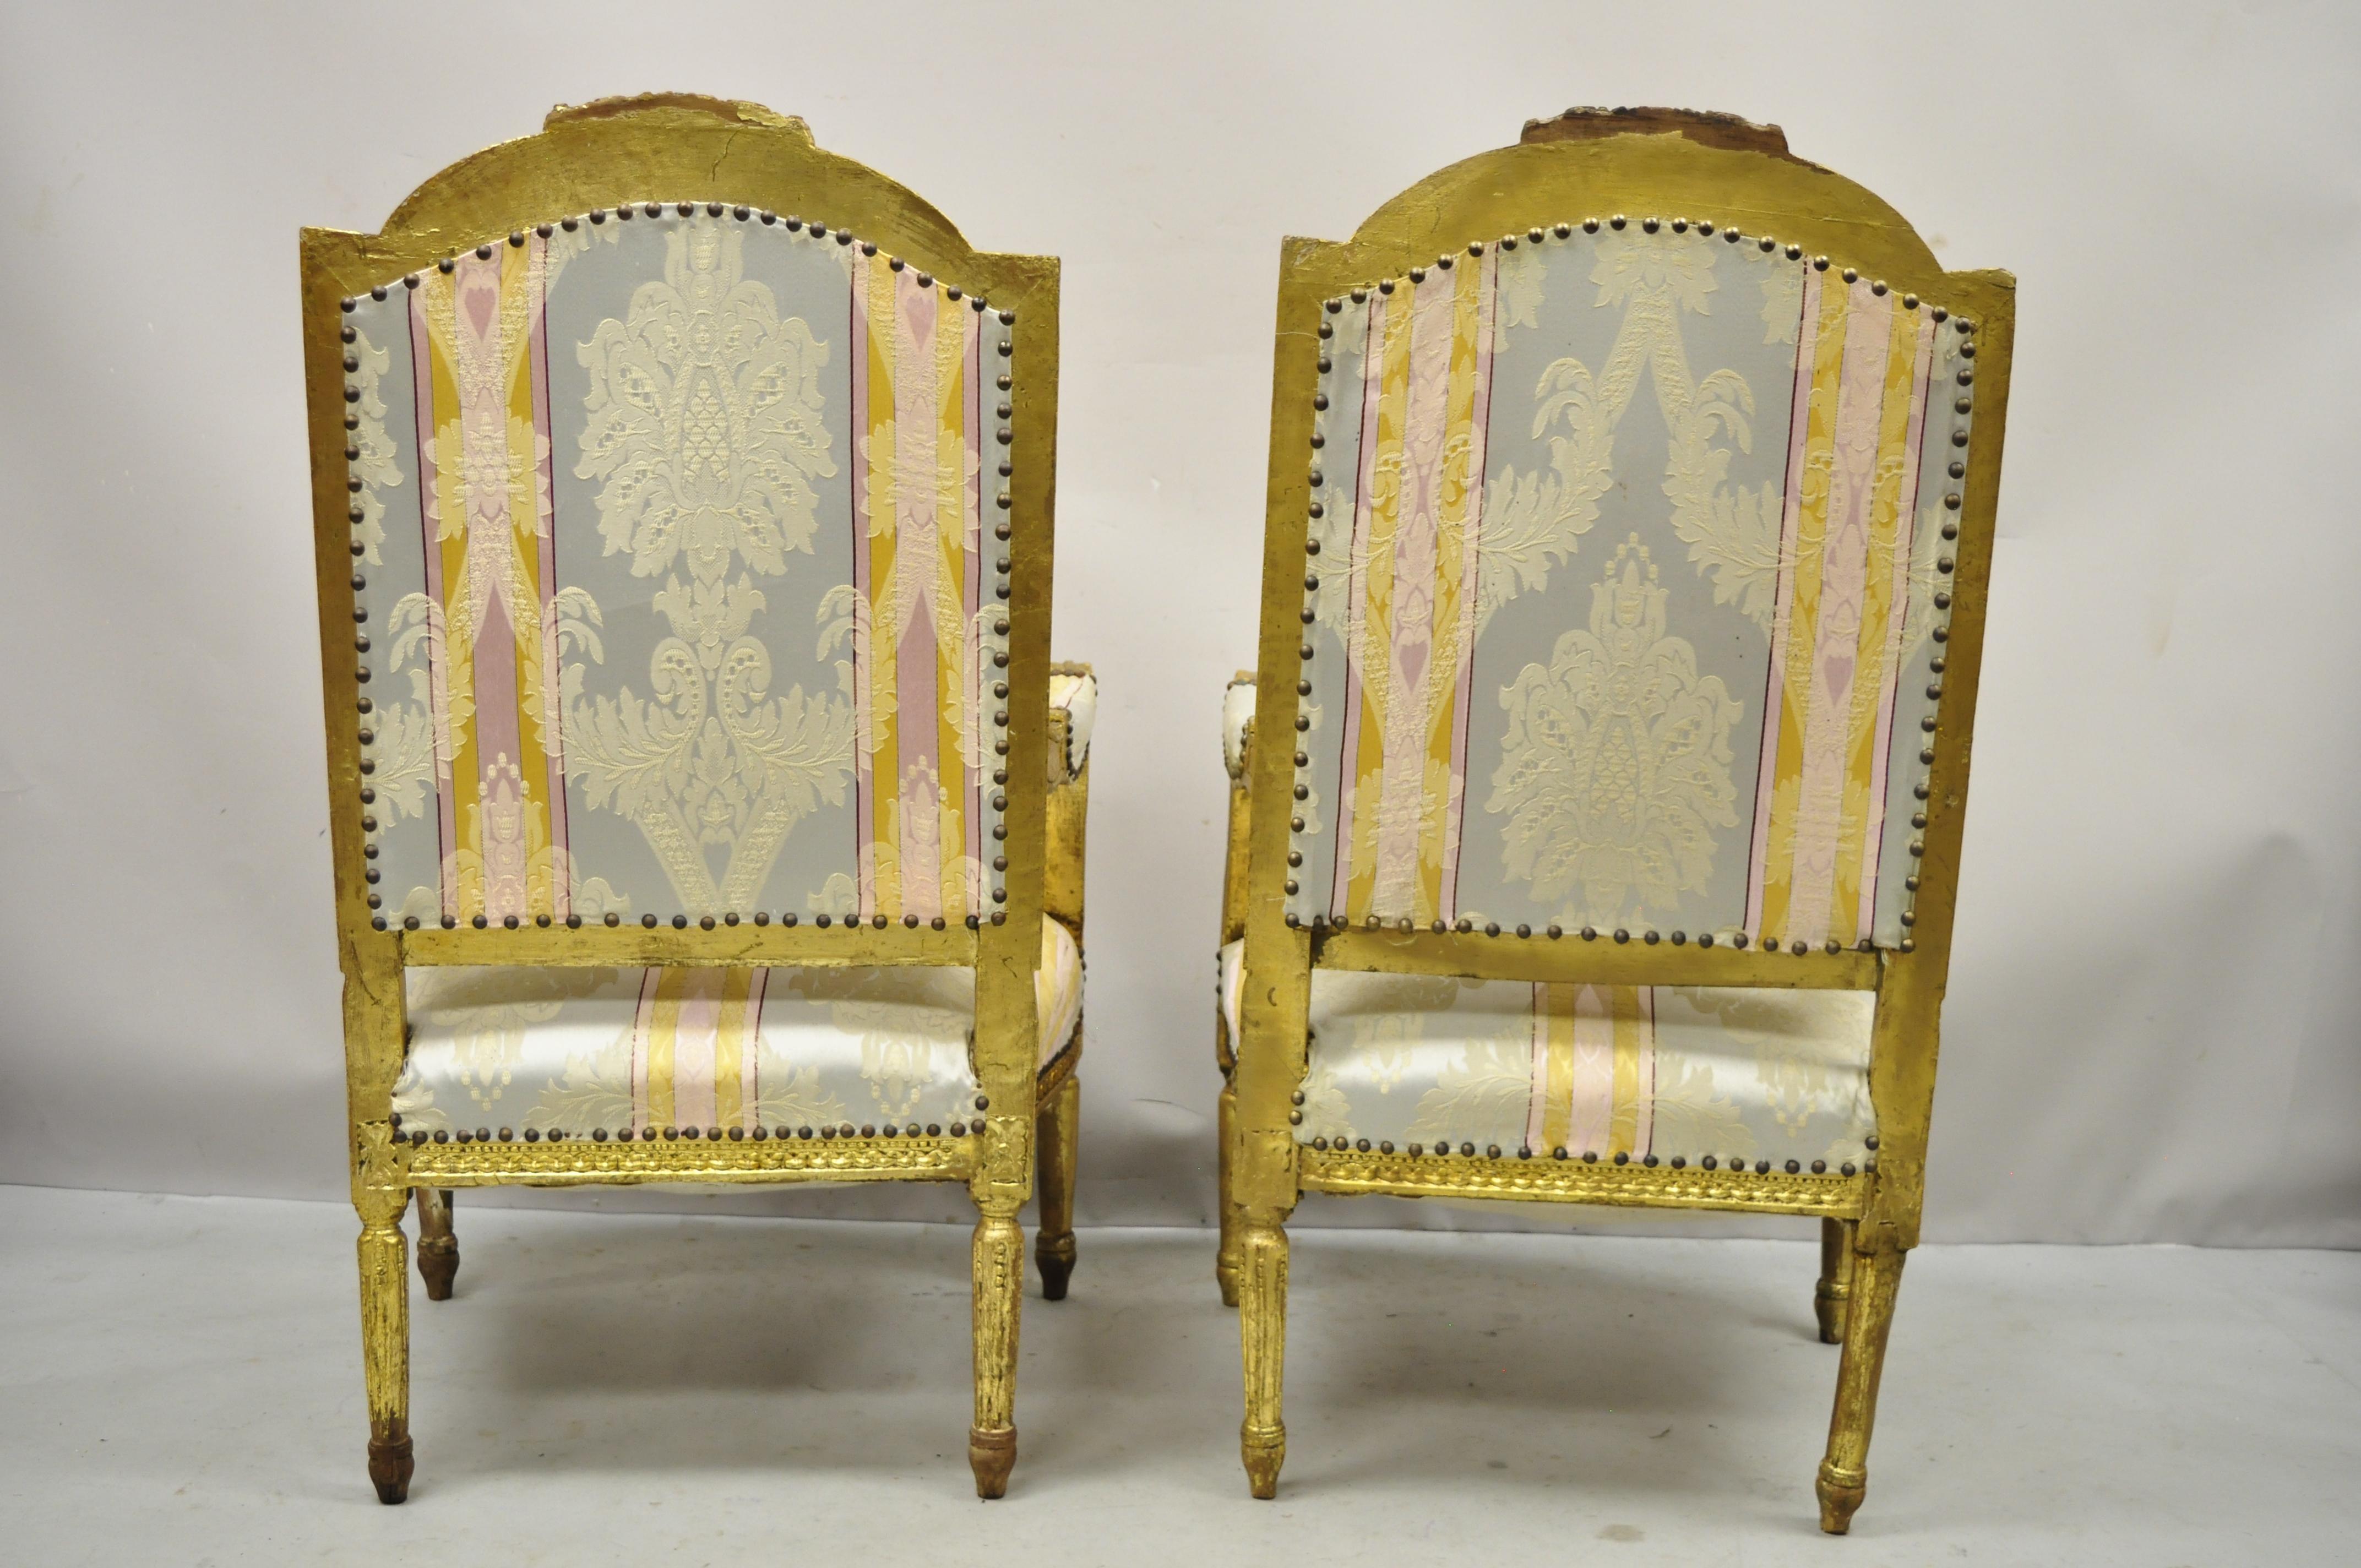 Vintage French Louis XVI Gold Giltwood Upholstered Lounge Chairs 'B', a Pair For Sale 4